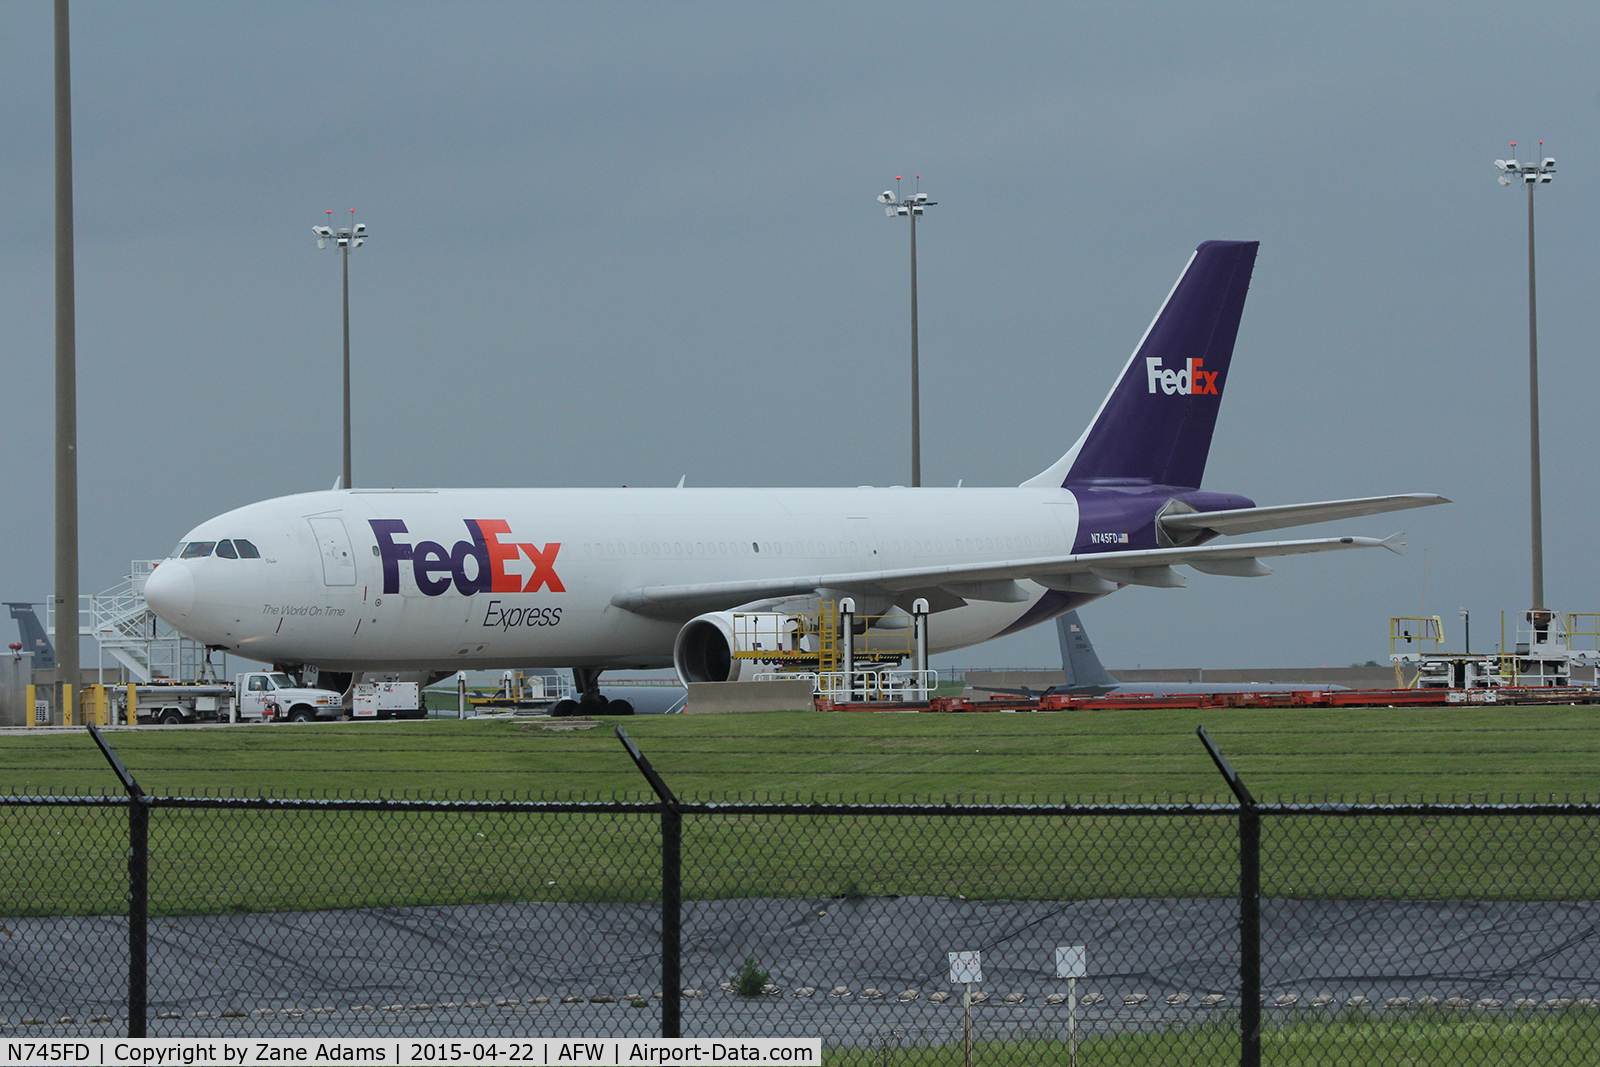 N745FD, 1992 Airbus A300B4-622R C/N 668, On the FedEx ramp at Alliance Airport - Fort Worth, TX